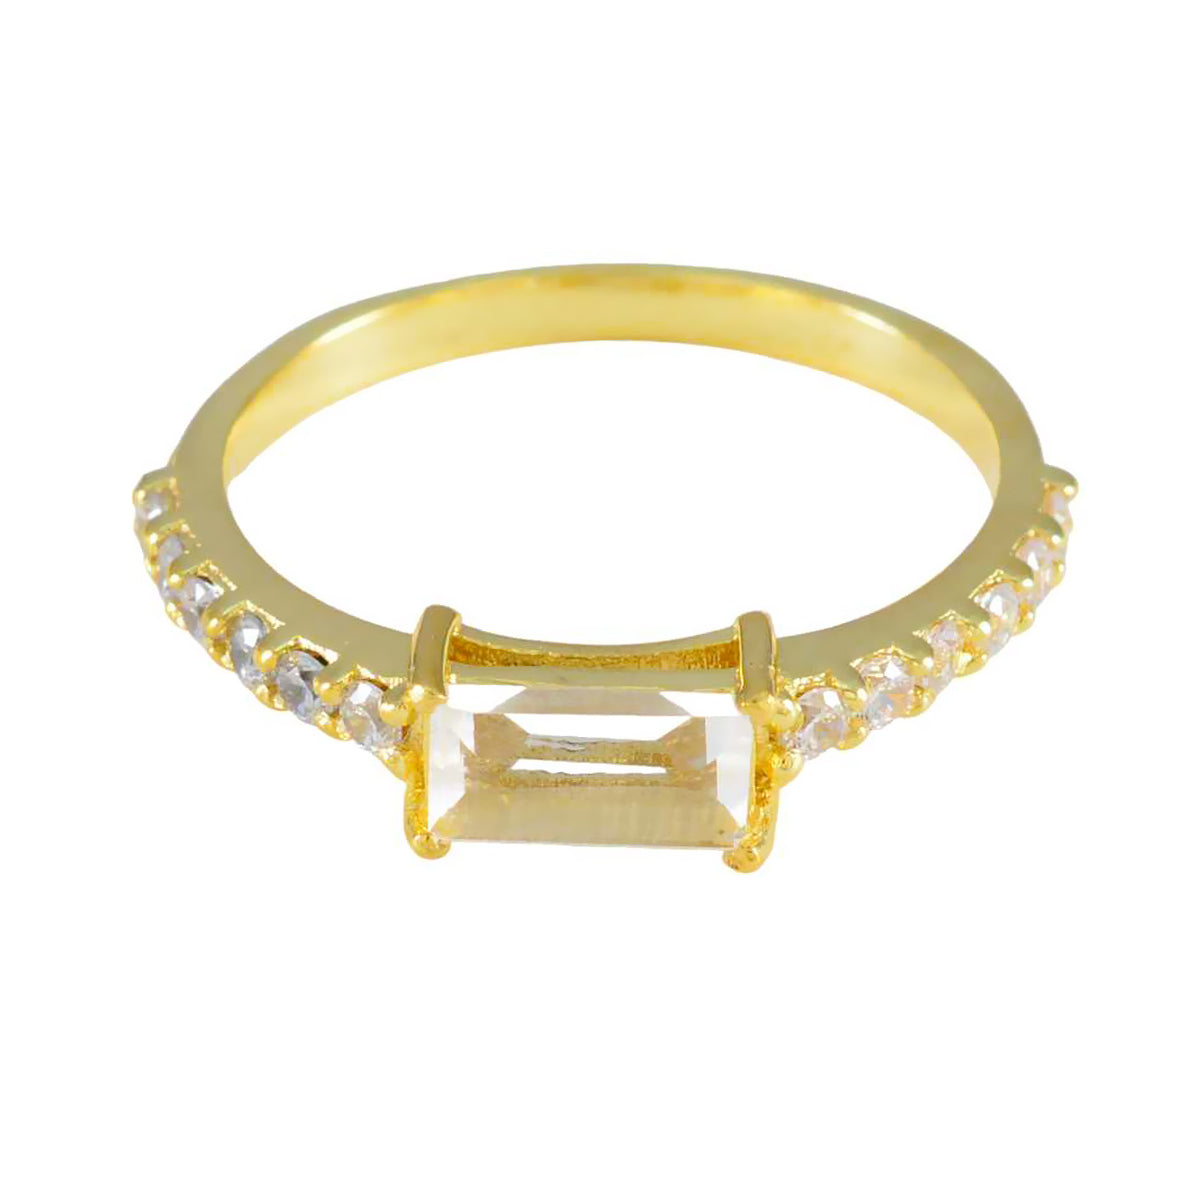 Riyo Suppiler Silver Ring With Yellow Gold Plating White CZ Stone Baguette Shape Prong Setting Ring